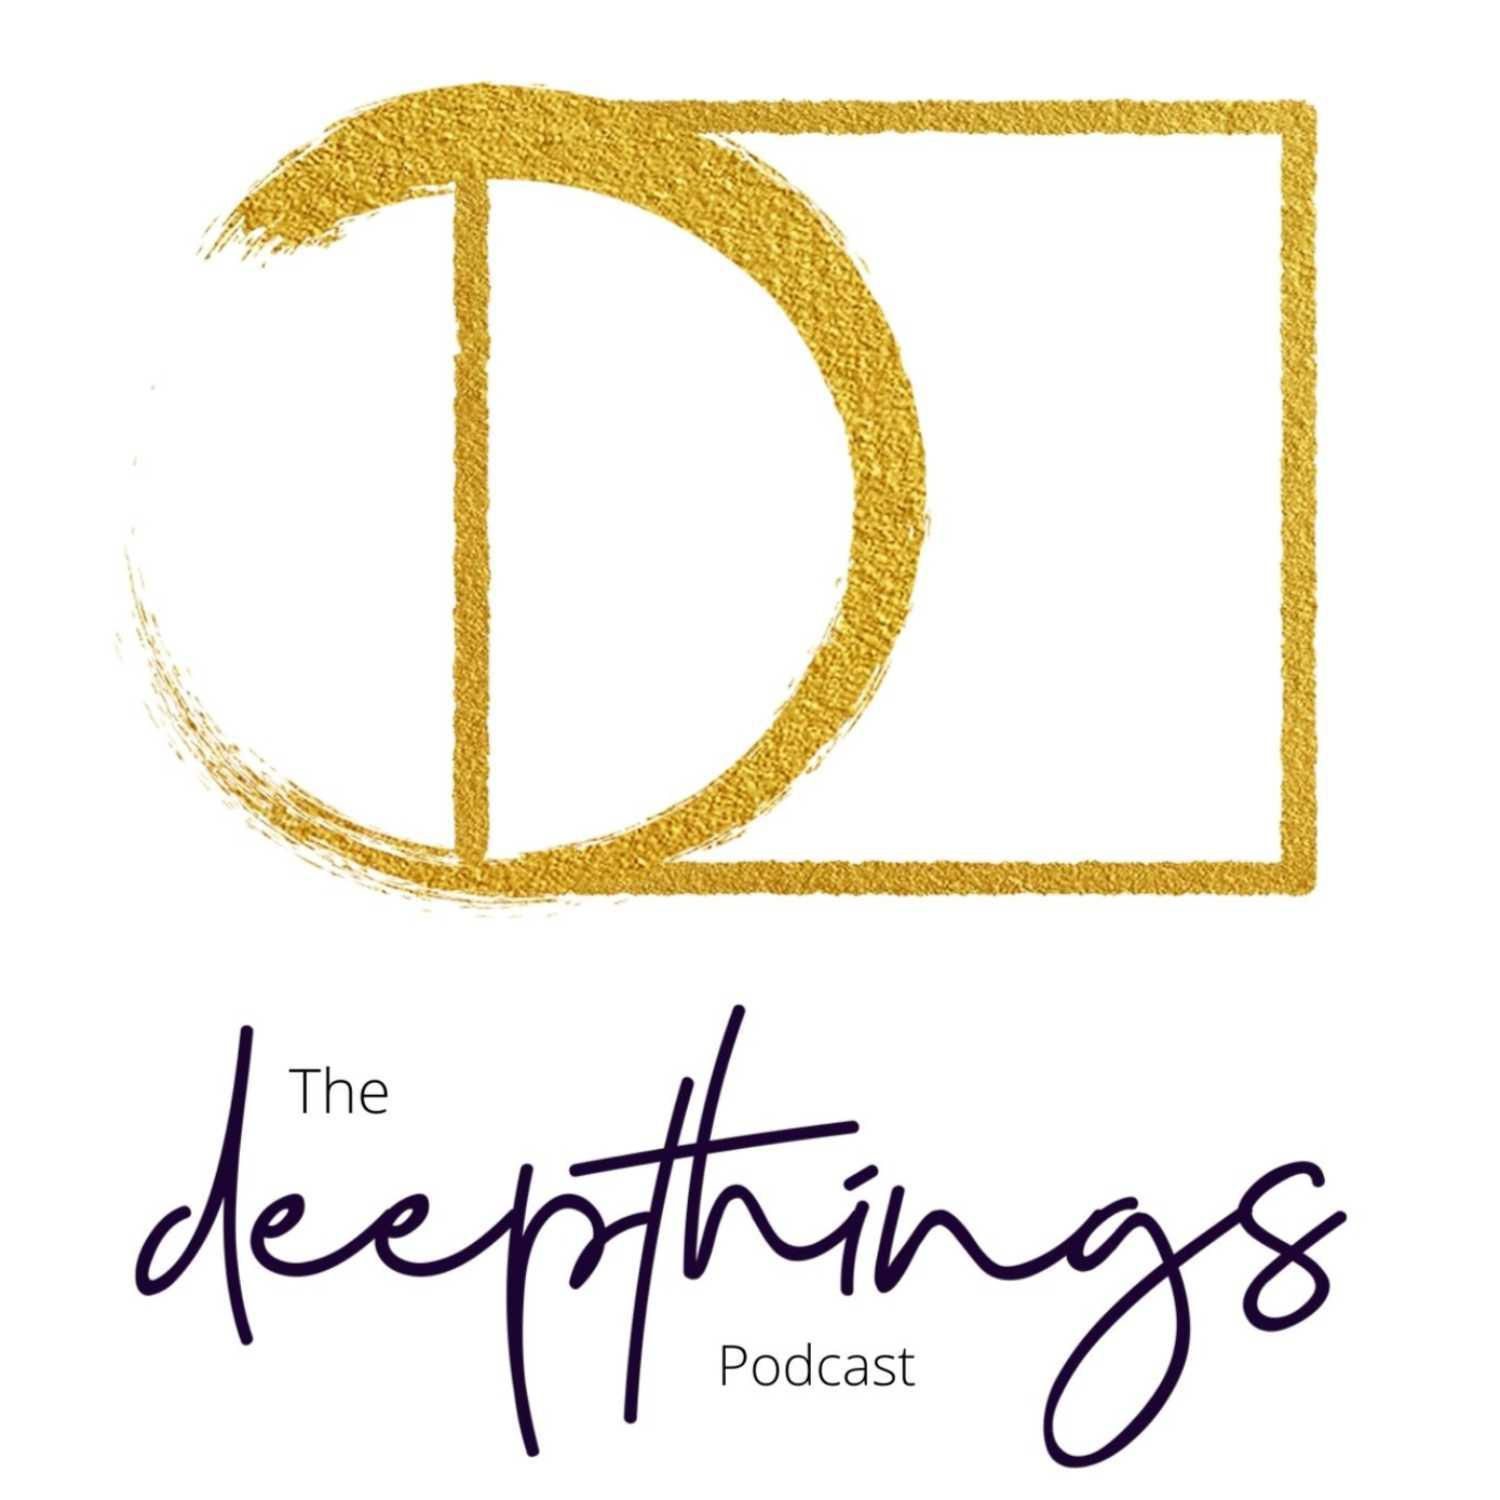 The DeepThings Podcast